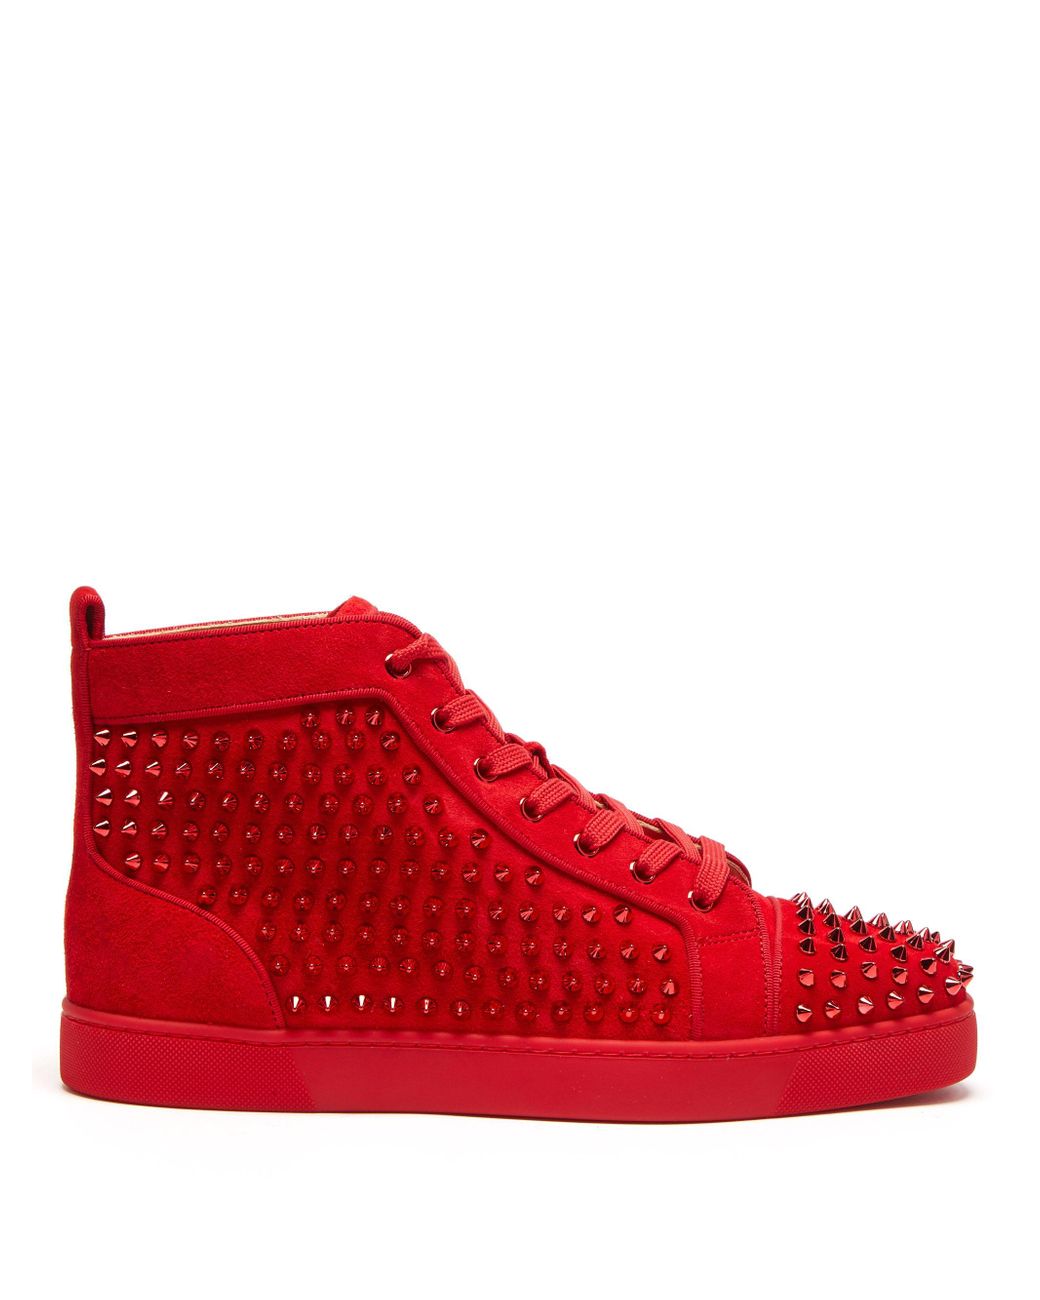 Christian Louboutin Louis Orlato High-top Spike-stud Suede Trainers in ...